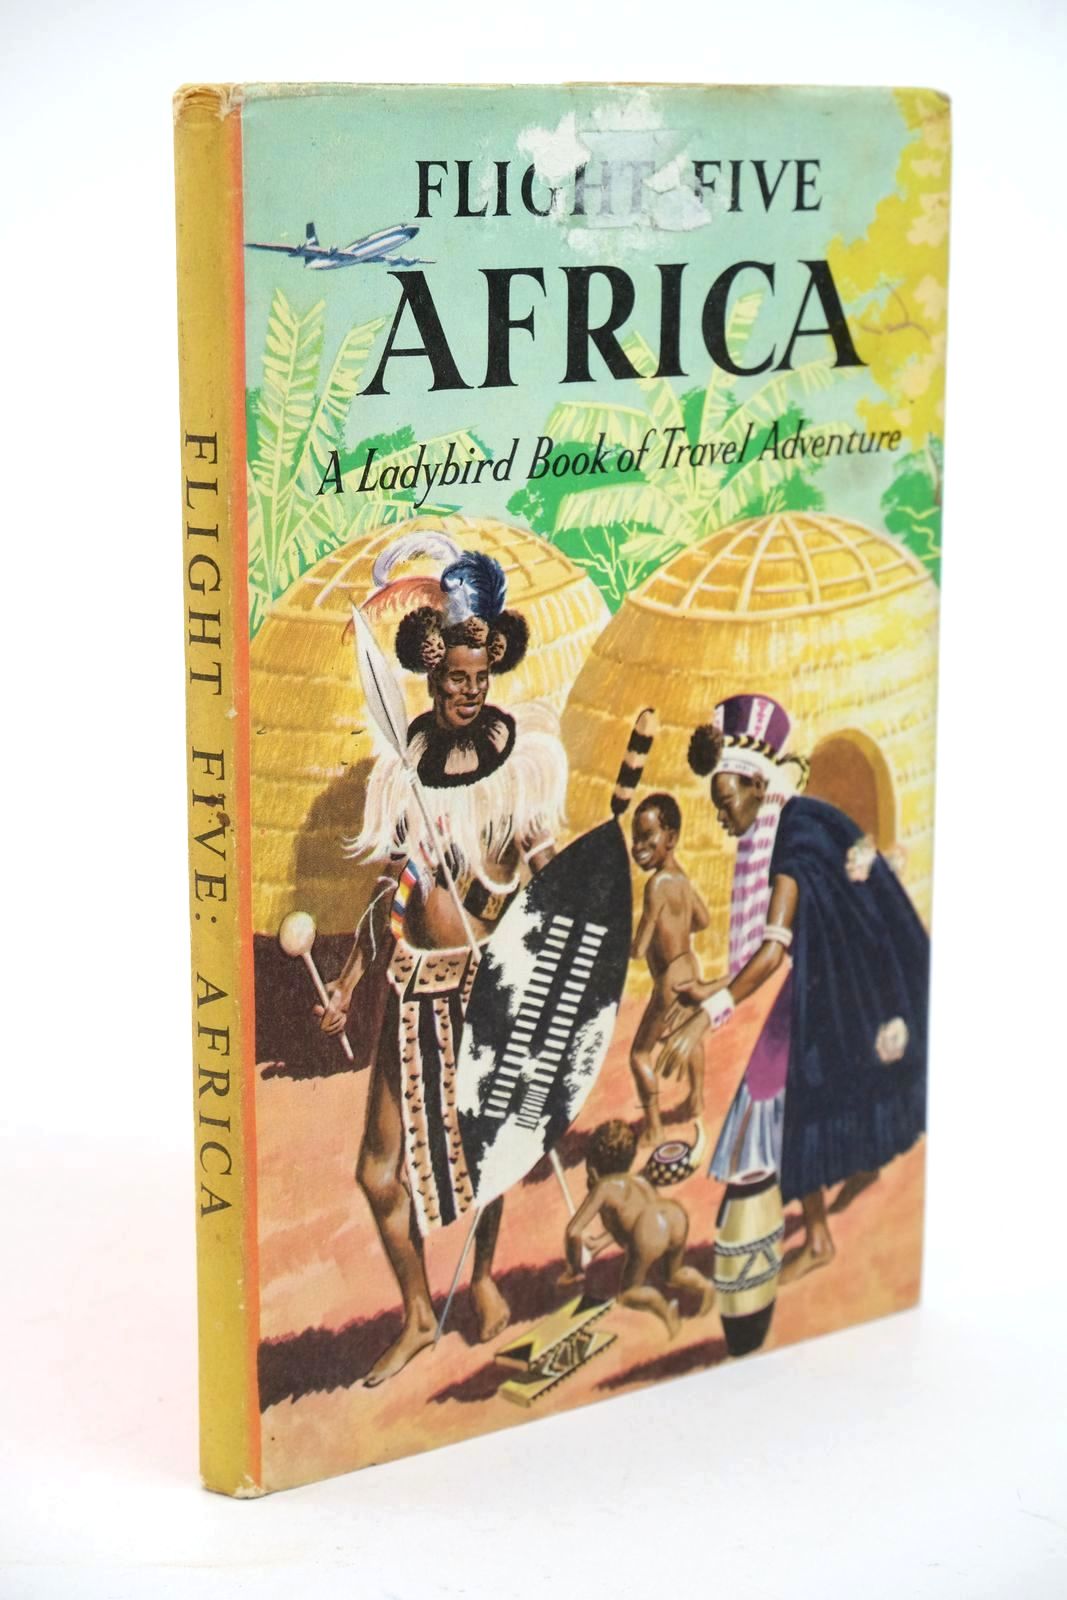 Photo of FLIGHT FIVE: AFRICA written by Daniell, David Scott illustrated by Matthew, Jack published by Wills & Hepworth Ltd. (STOCK CODE: 1323153)  for sale by Stella & Rose's Books